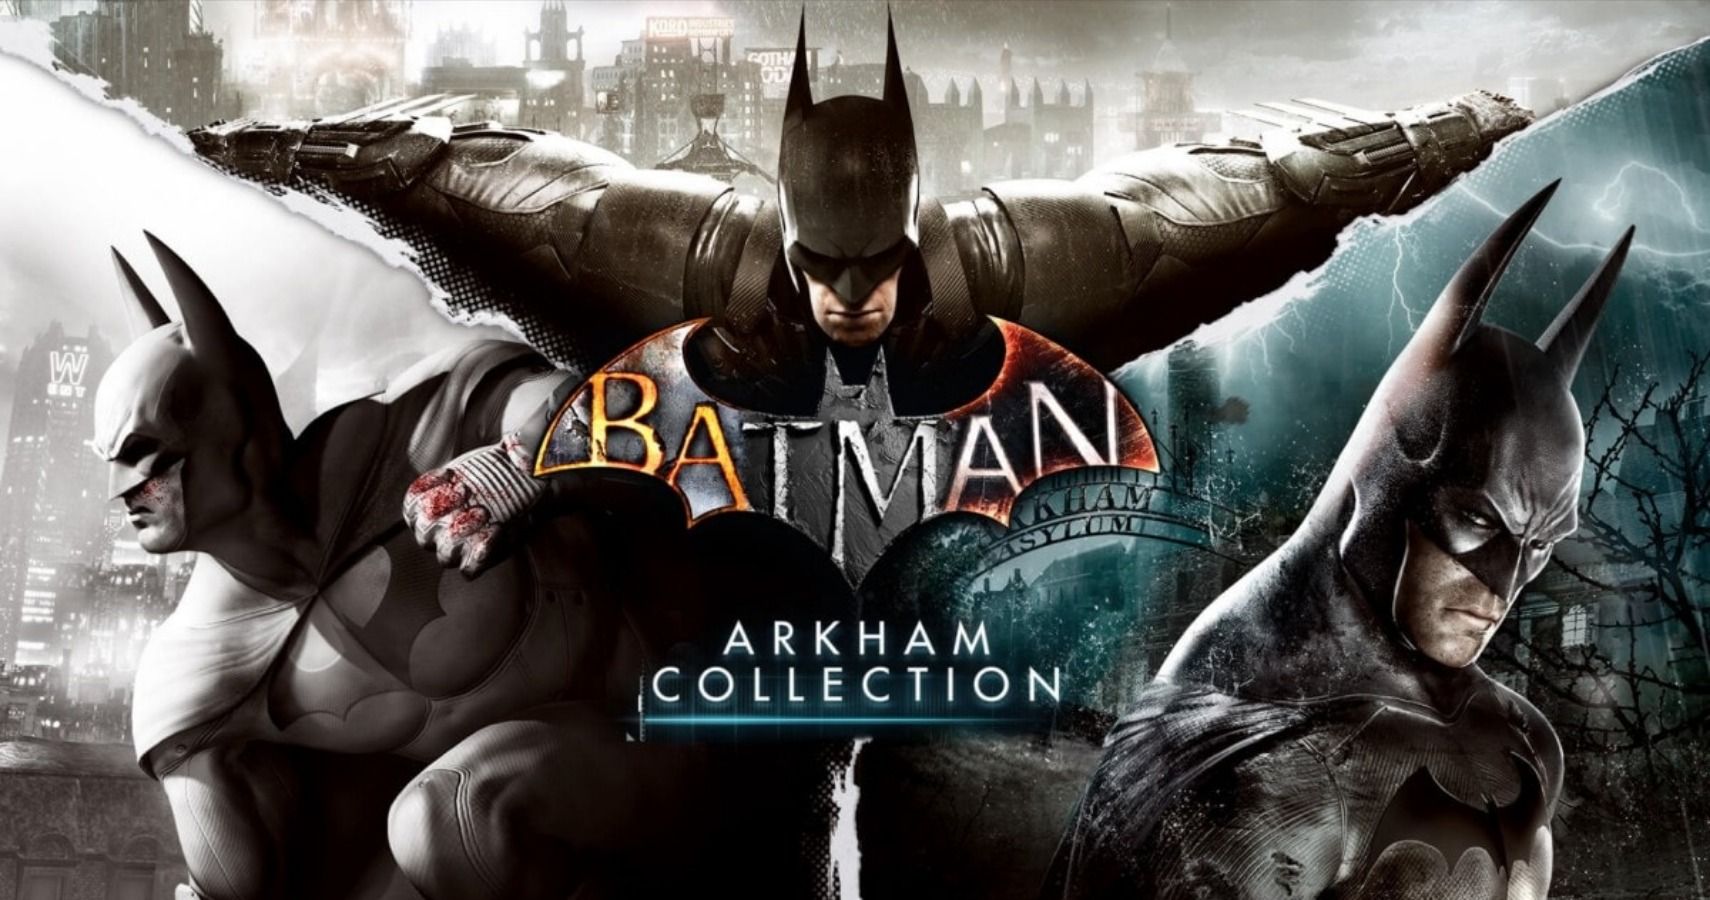 10 Annoying Things About The Batman Arkham Games